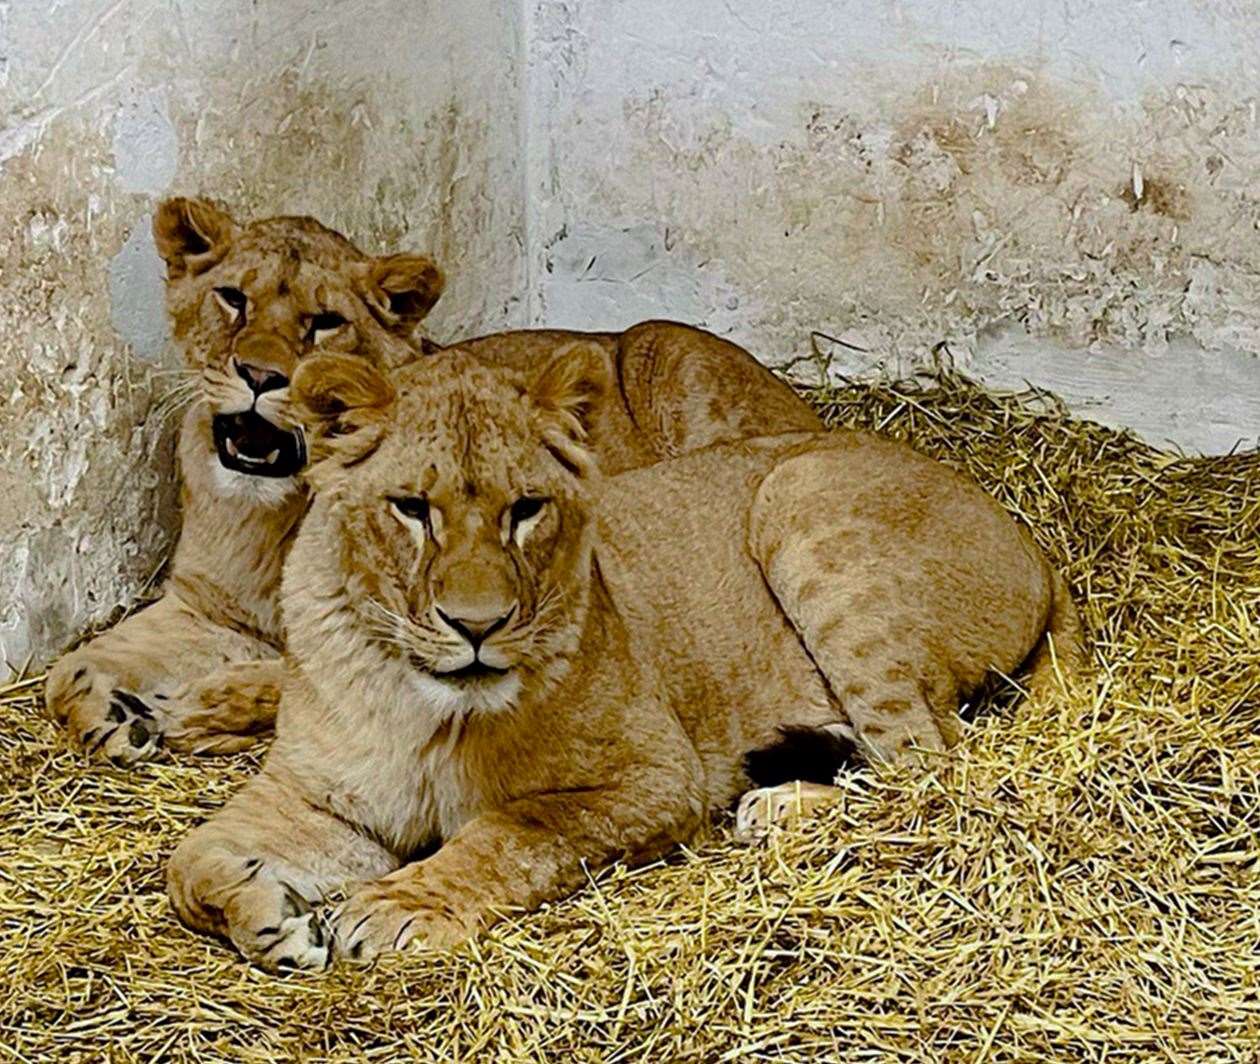 Sisters Amani and Lira were rescued from a breeding facility. Picture: Wild Animal Rescue/IFAW